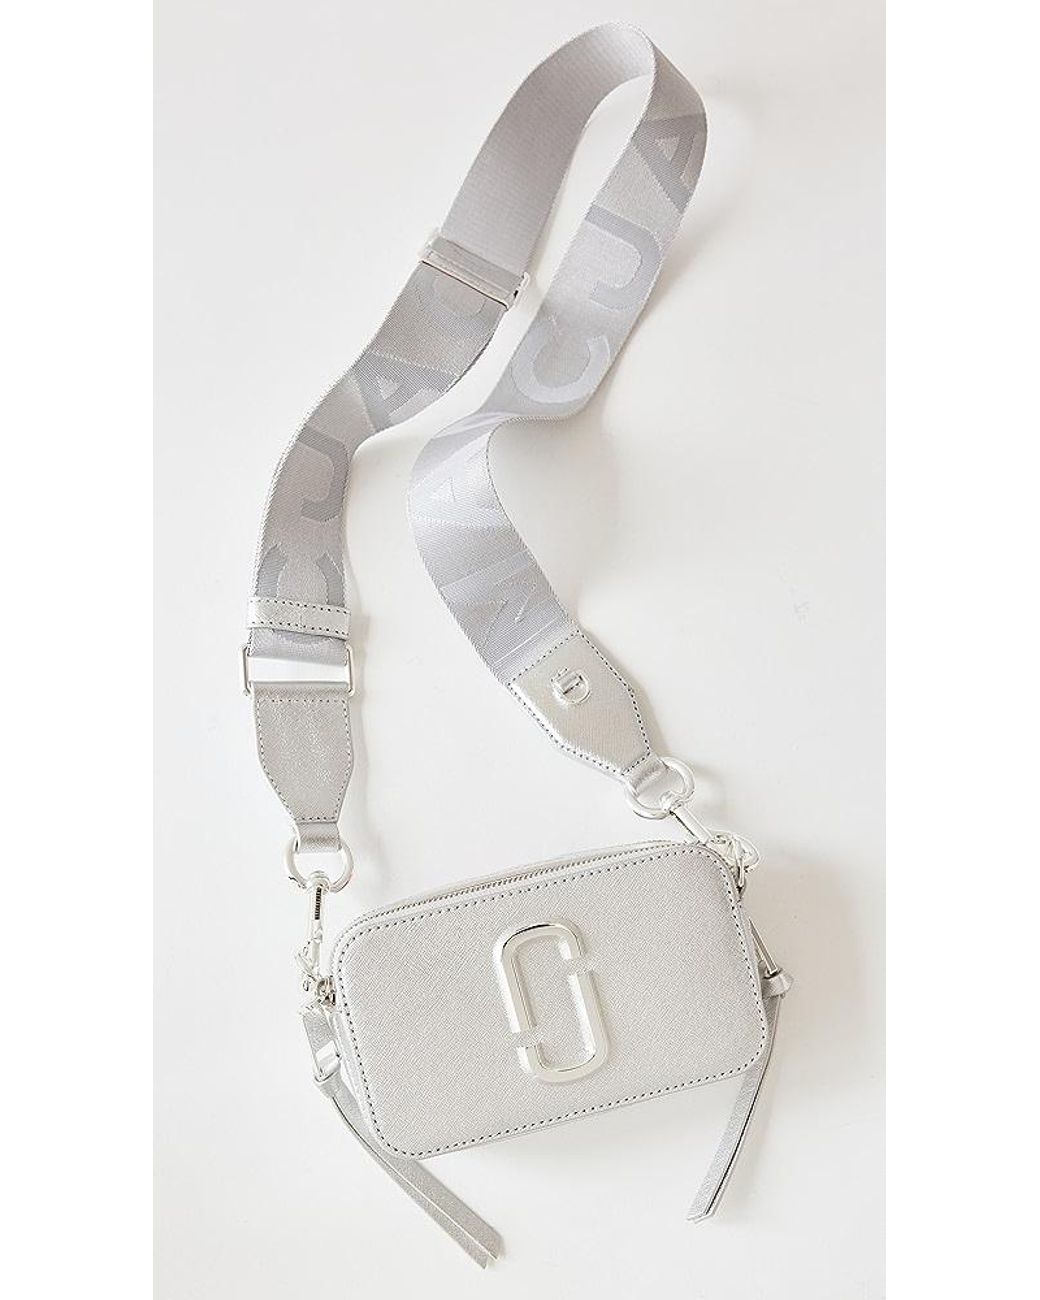 Marc Jacobs The Snapshot Bag in White